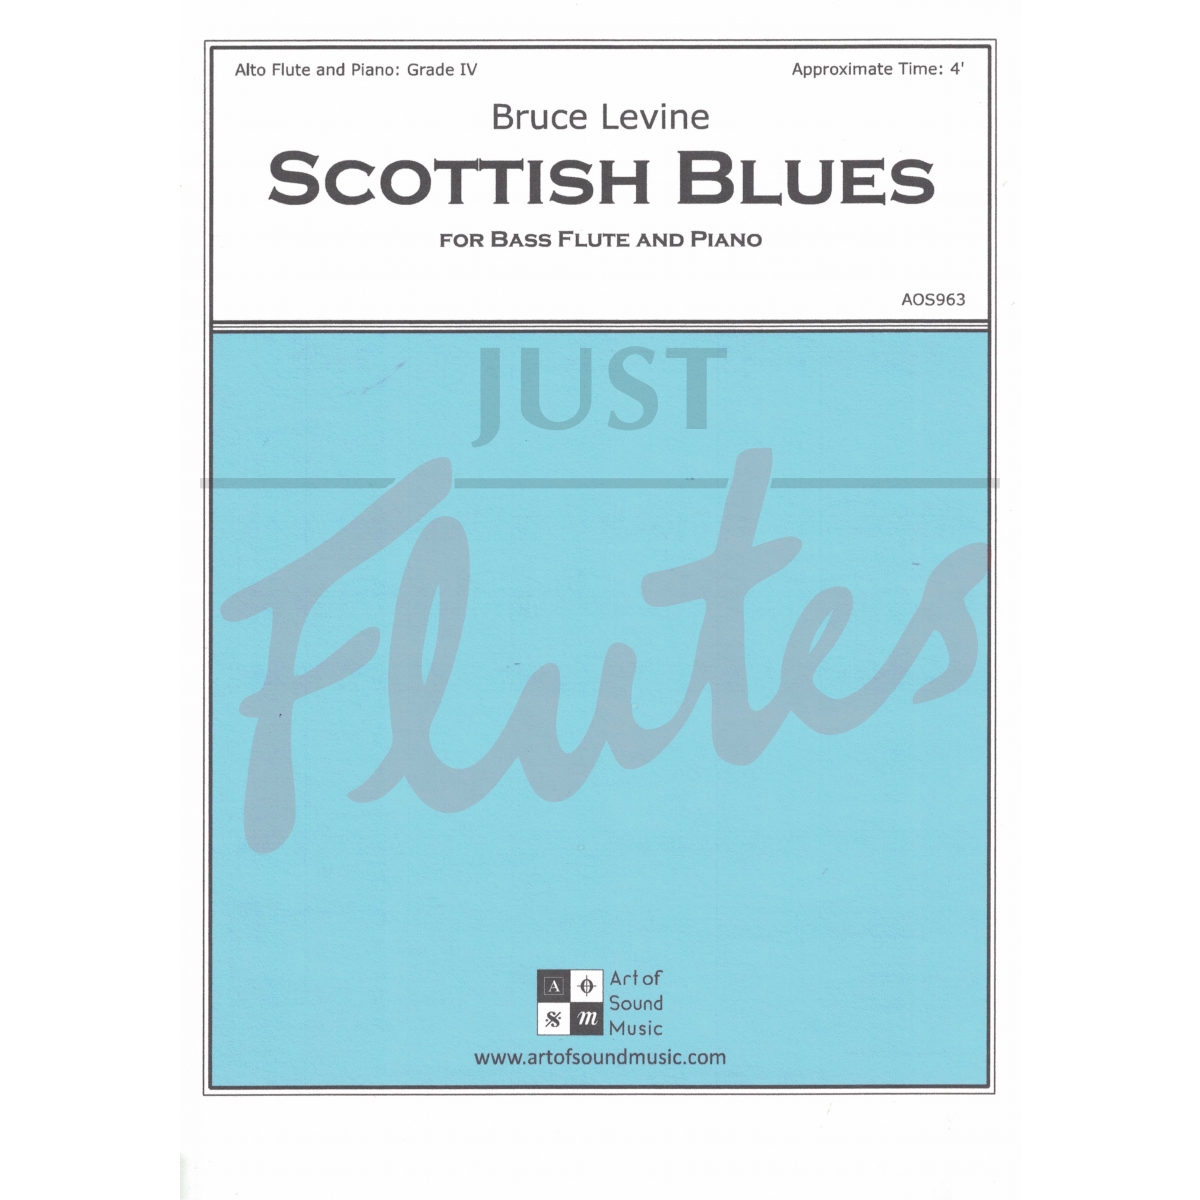 Scottish Blues for Bass Flute and Piano